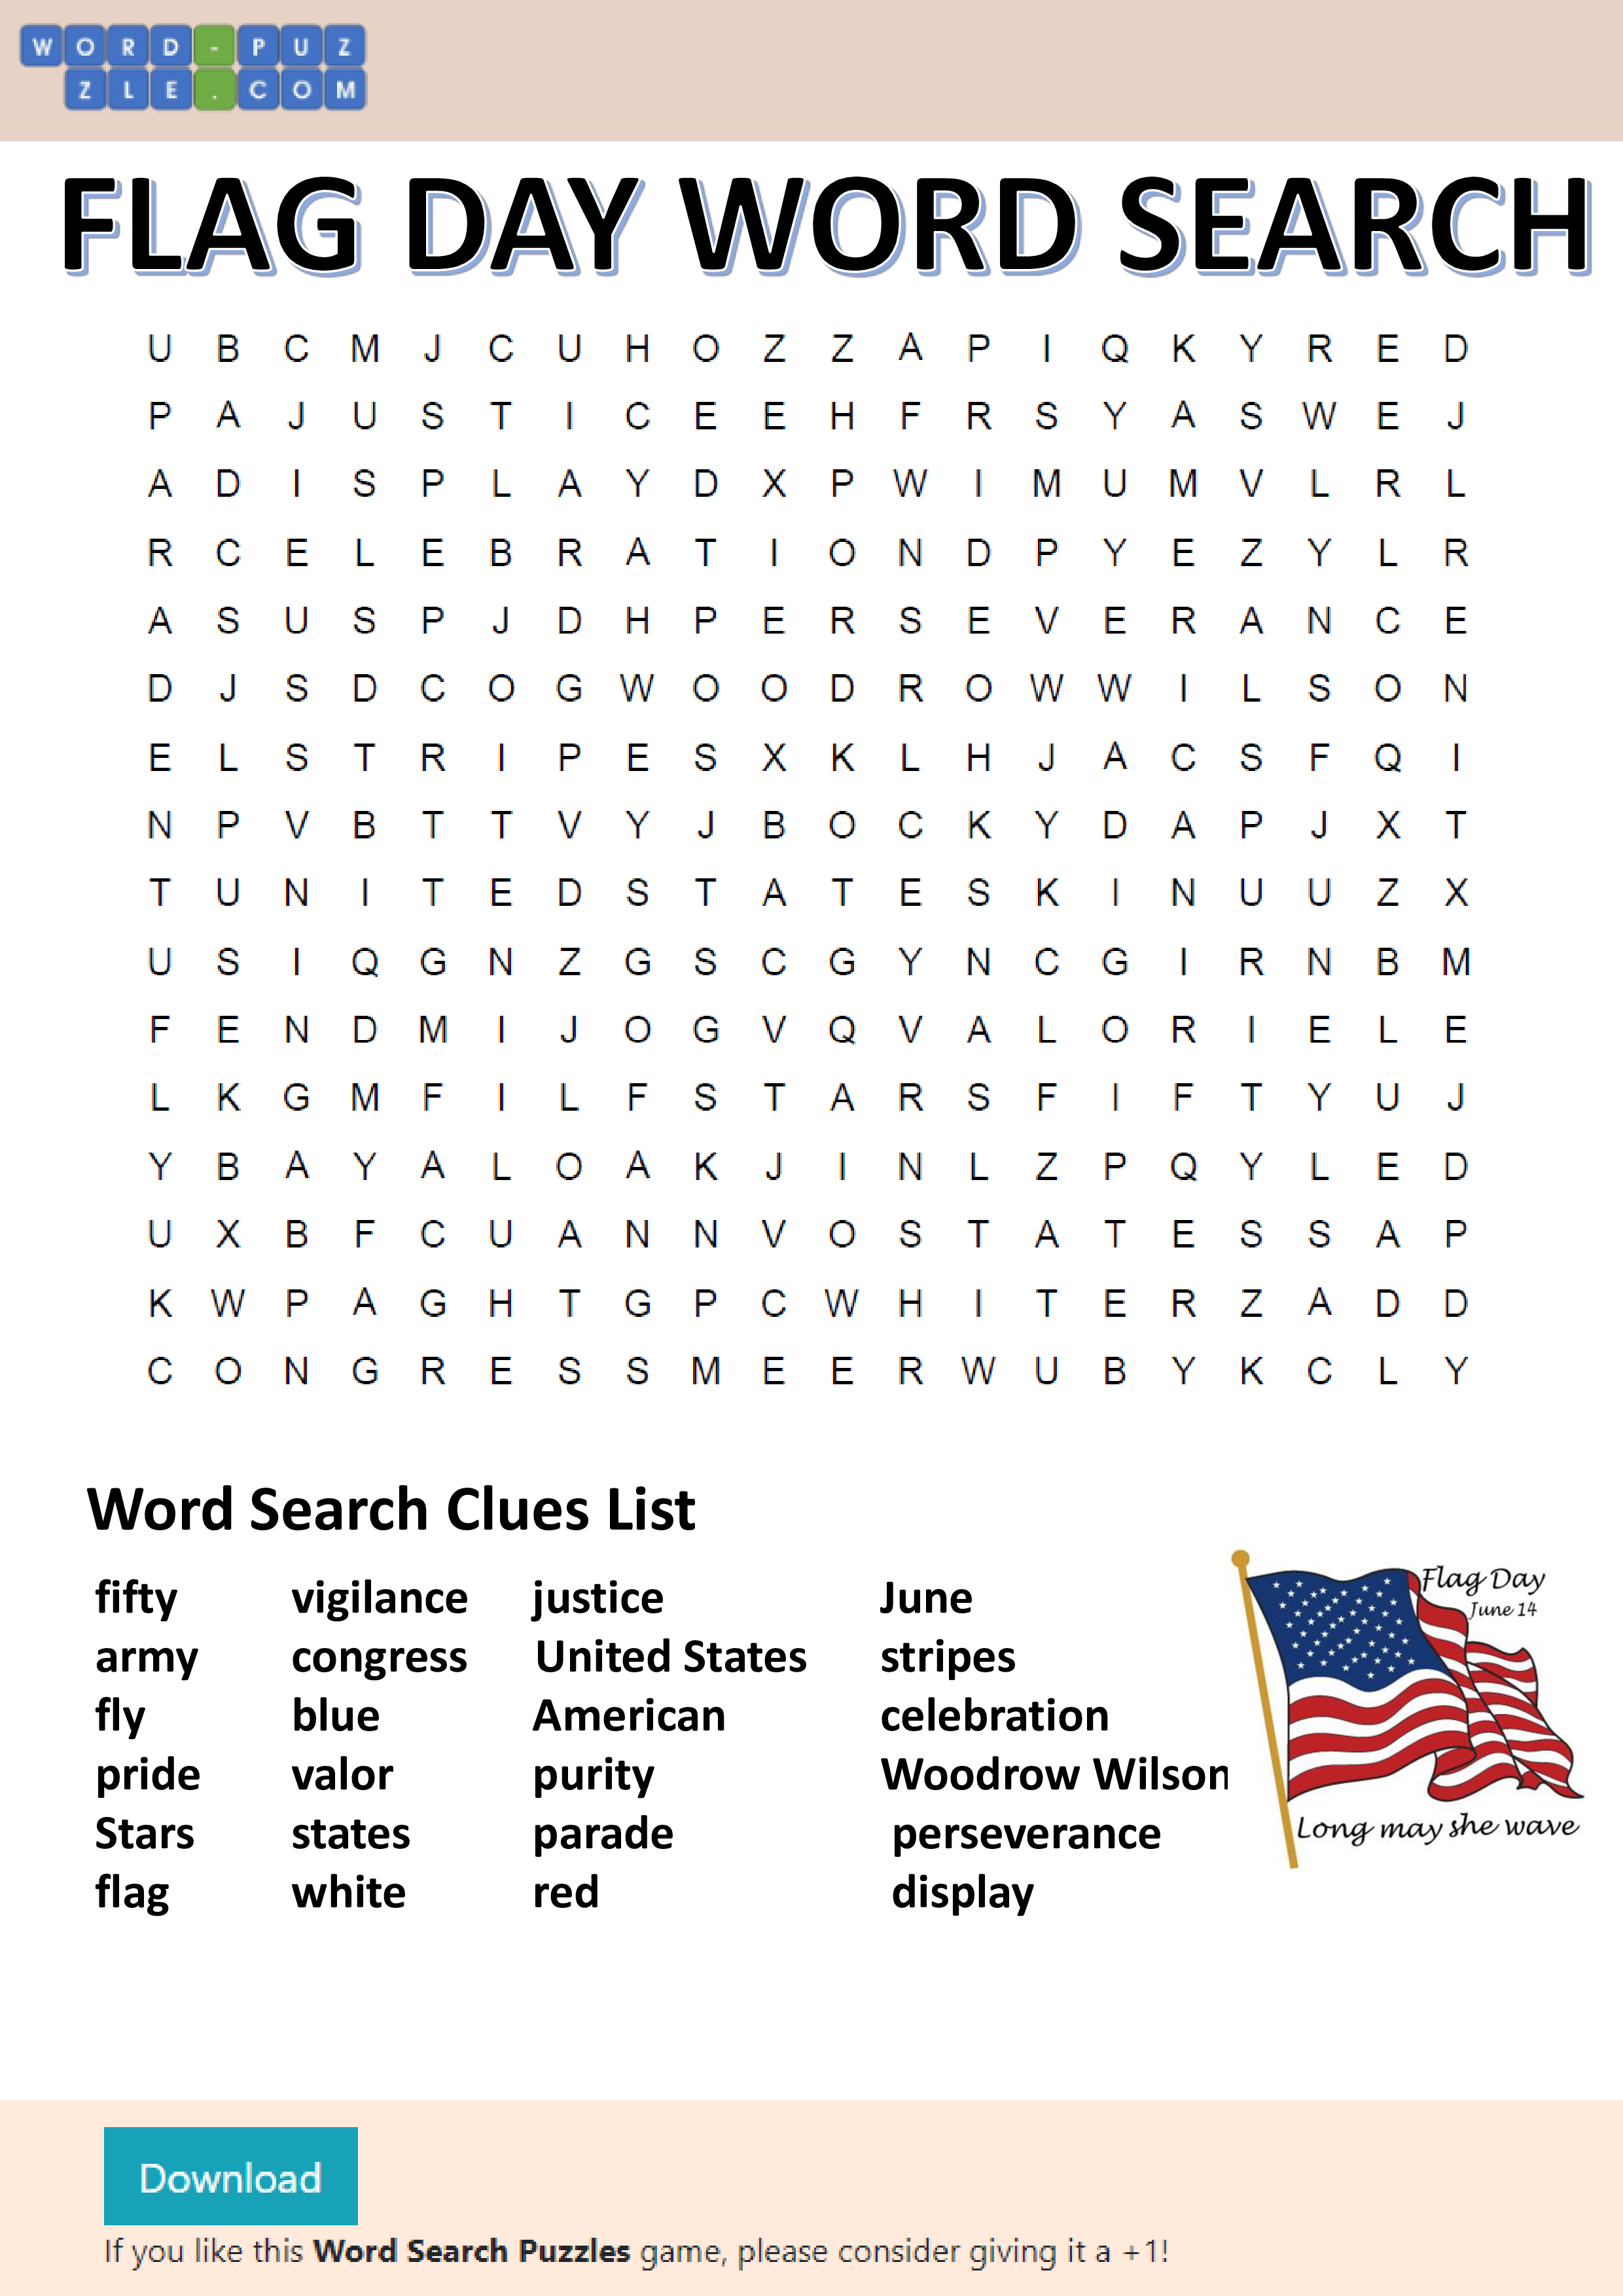 Flag Day Word Search main image